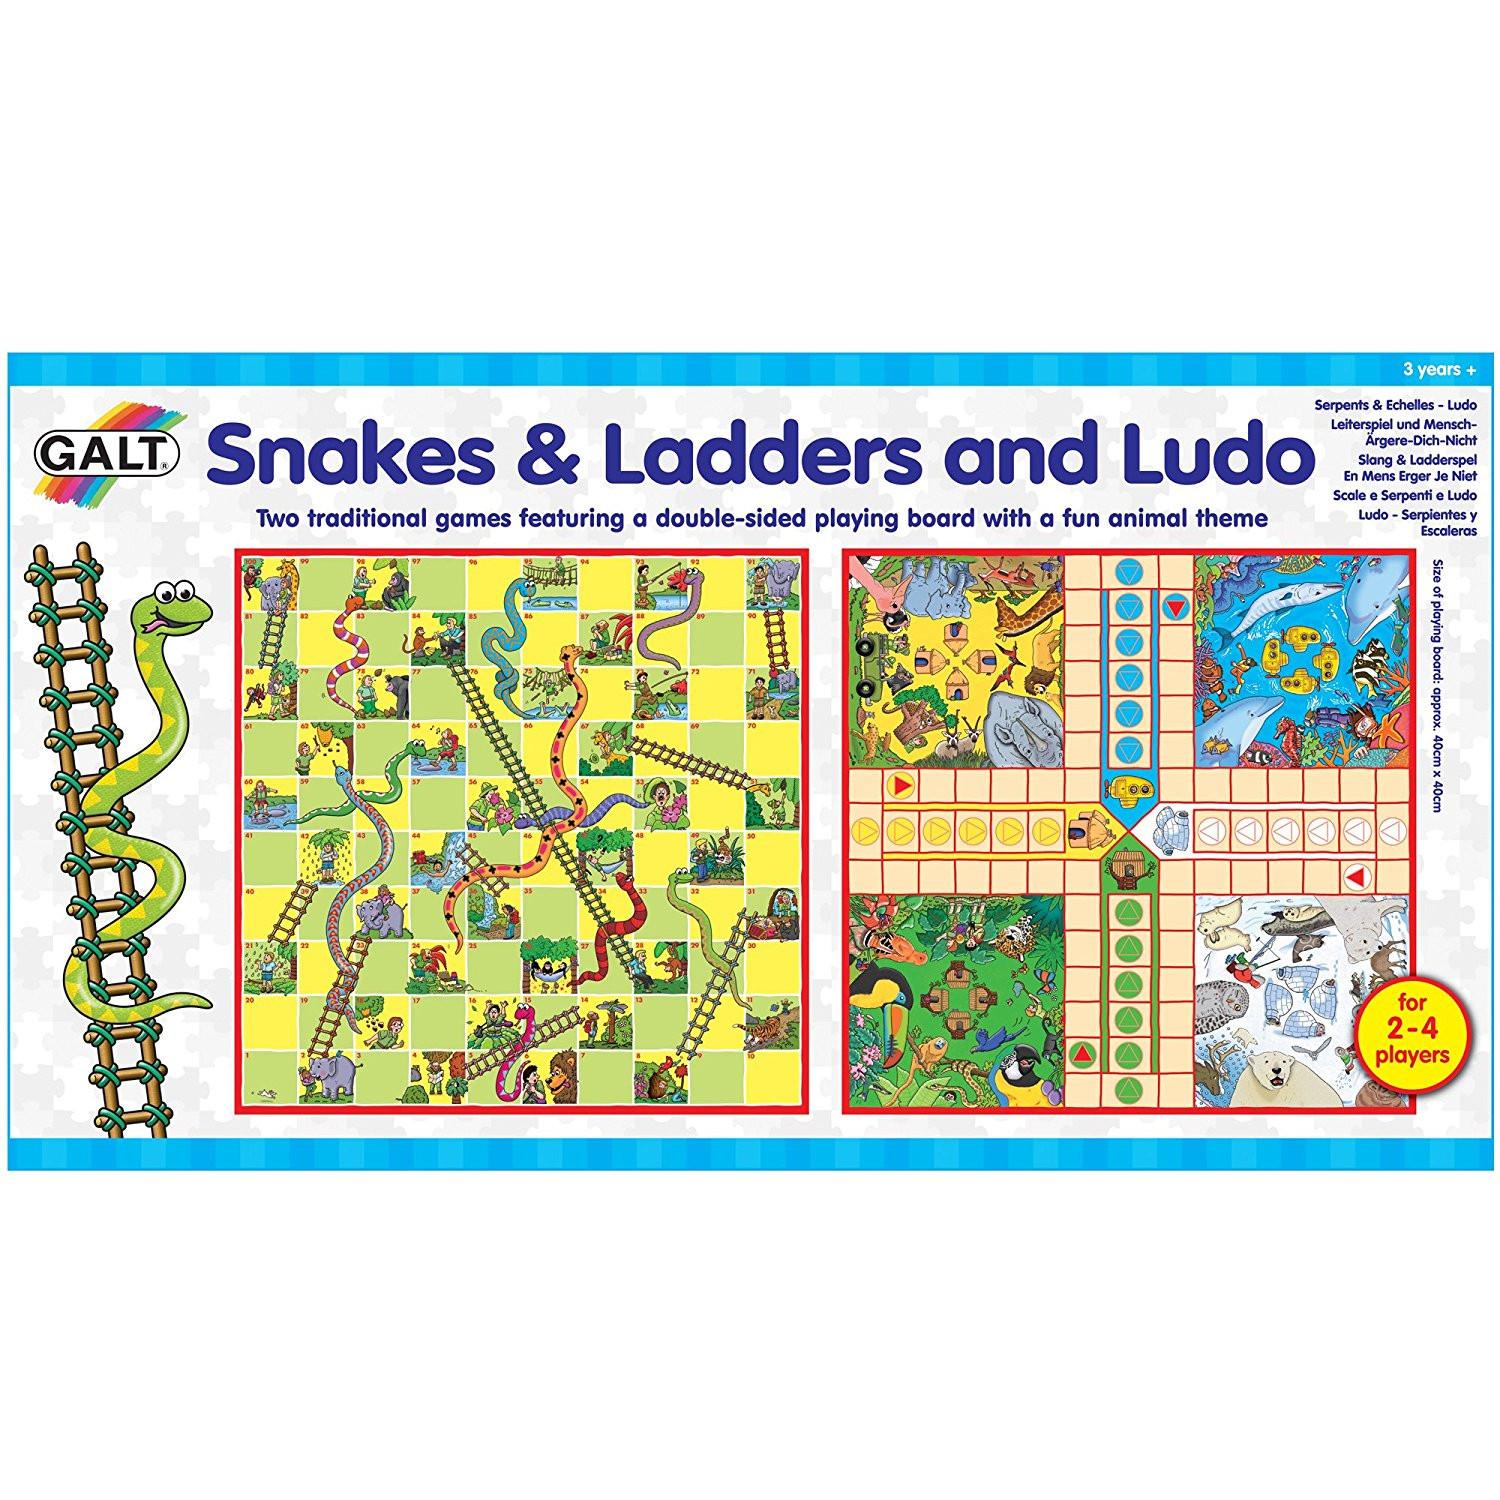 Wallpaper Engine G2a - Snakes And Ladders And Ludo , HD Wallpaper & Backgrounds